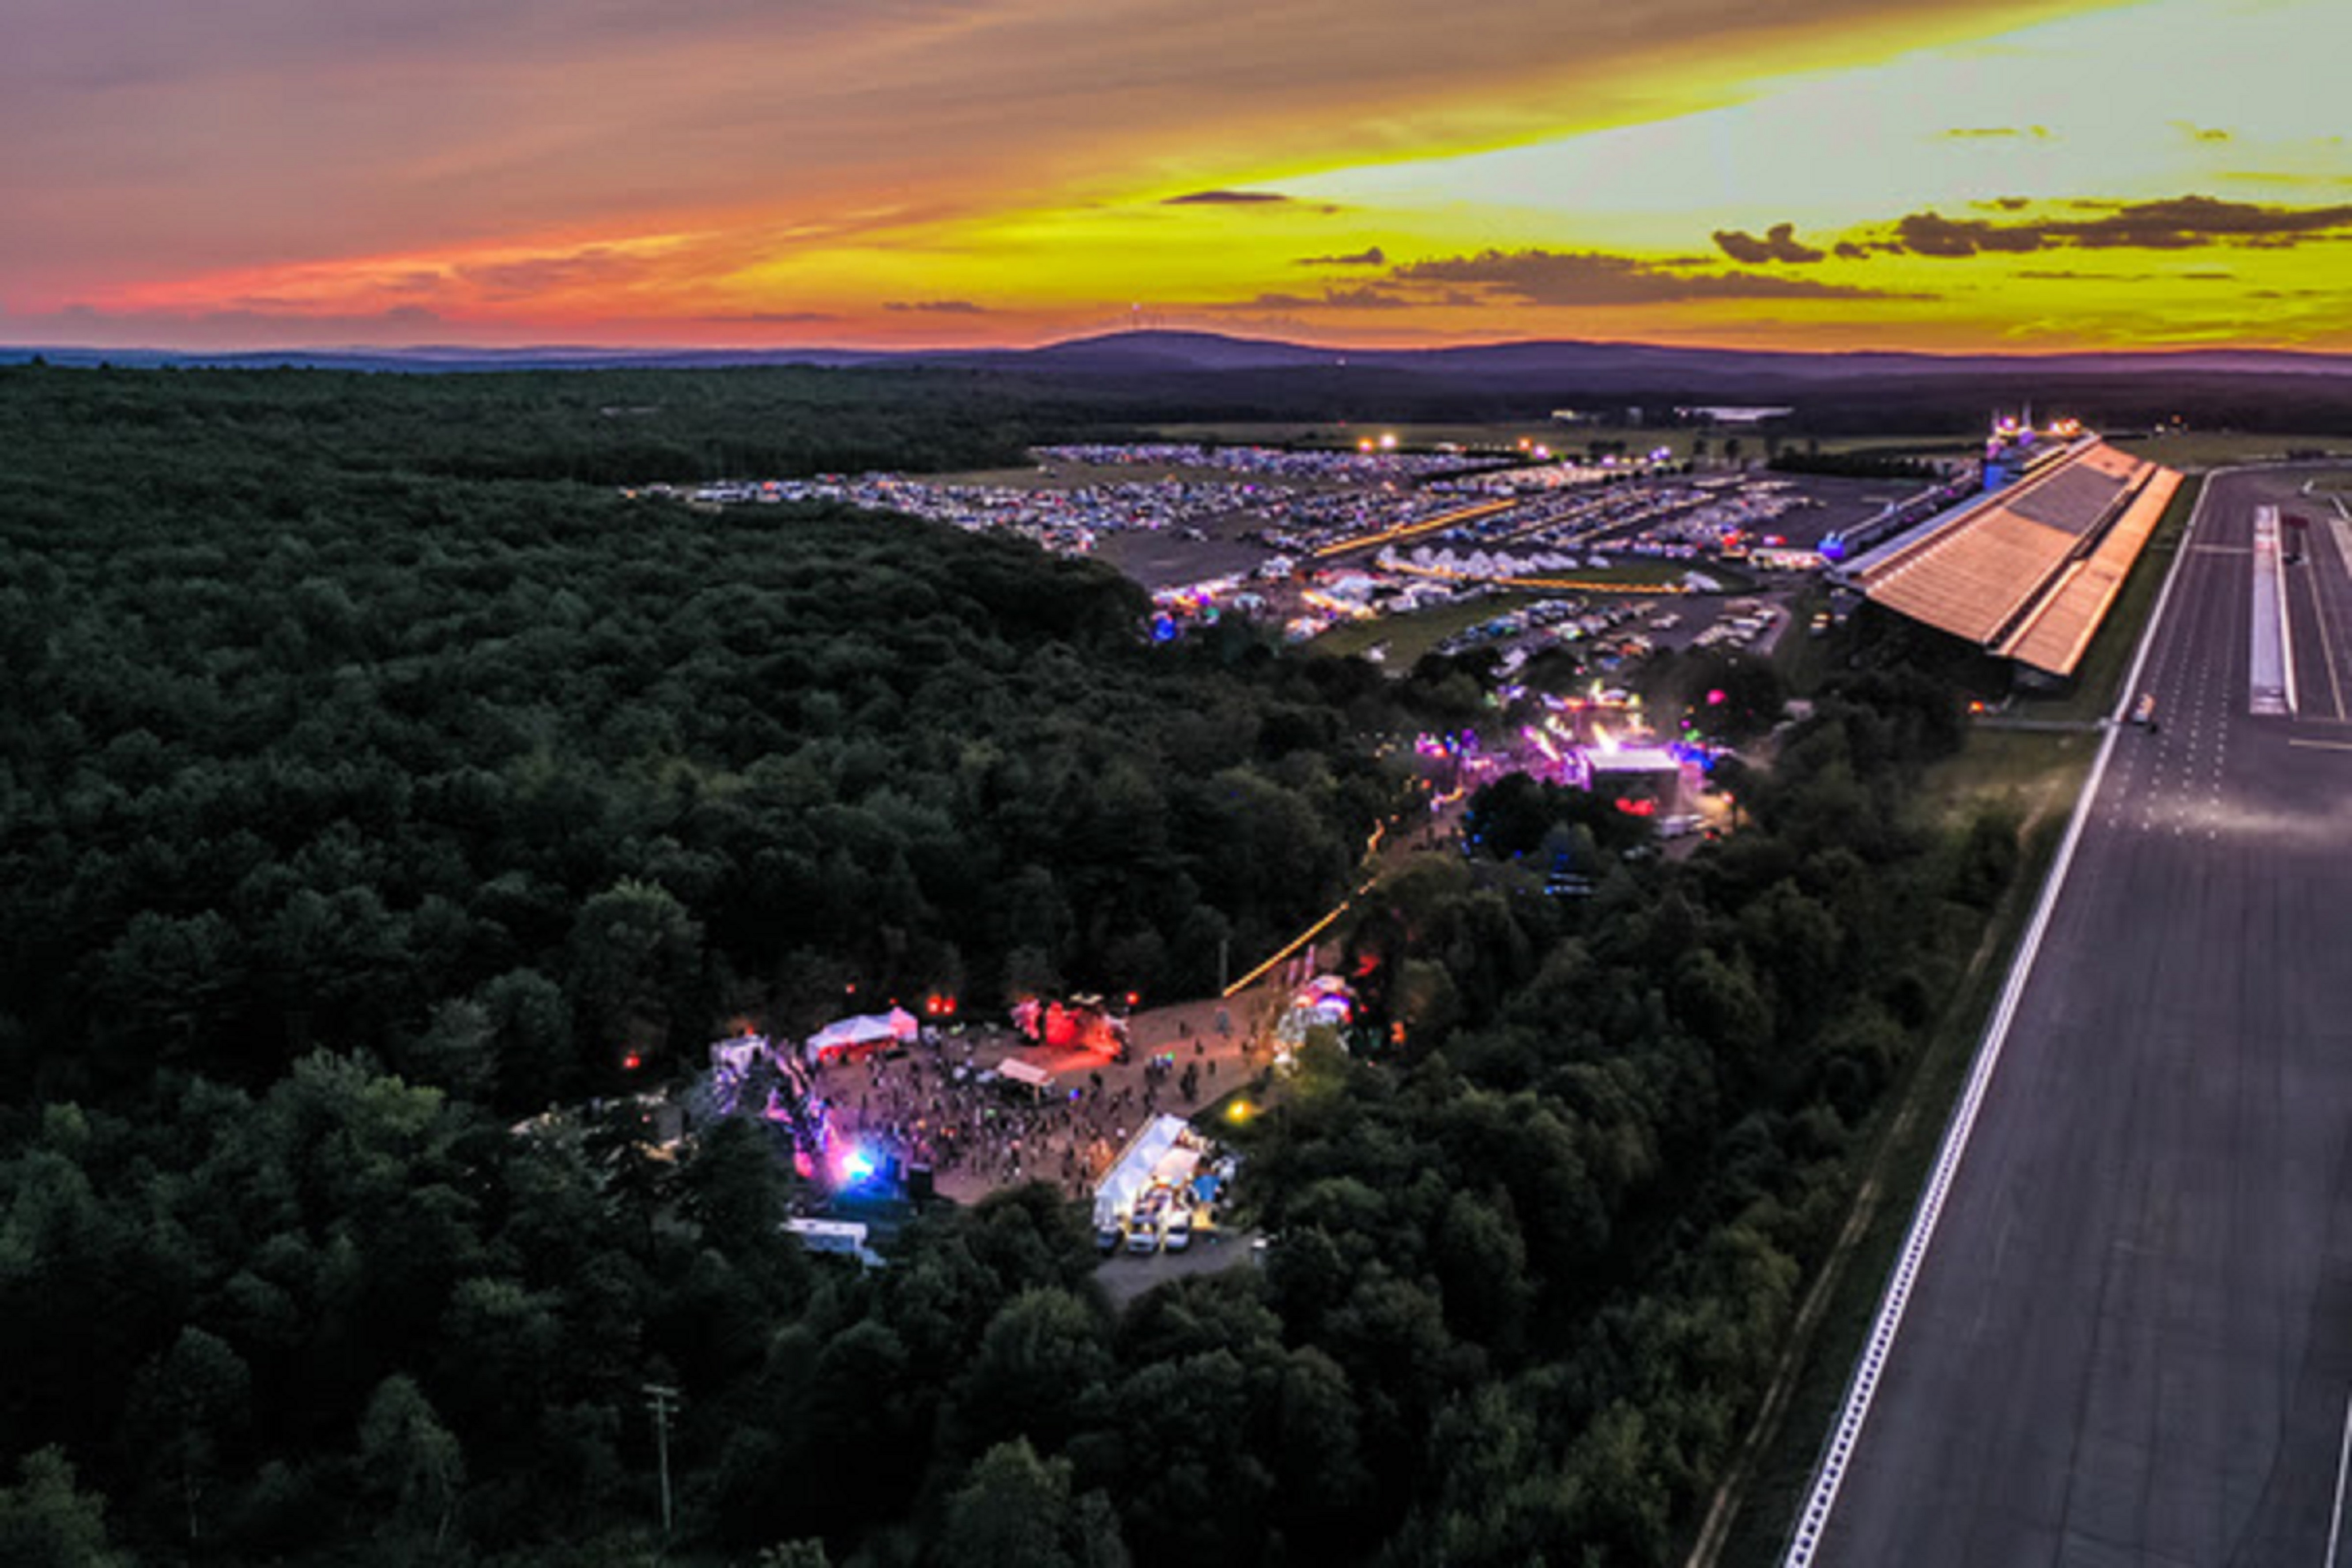 Elements Music and Arts Festival 2022 Wraps Up an Incredibly Successful Fifth Year With a New Home, a Fresh Look, Renewed Energy